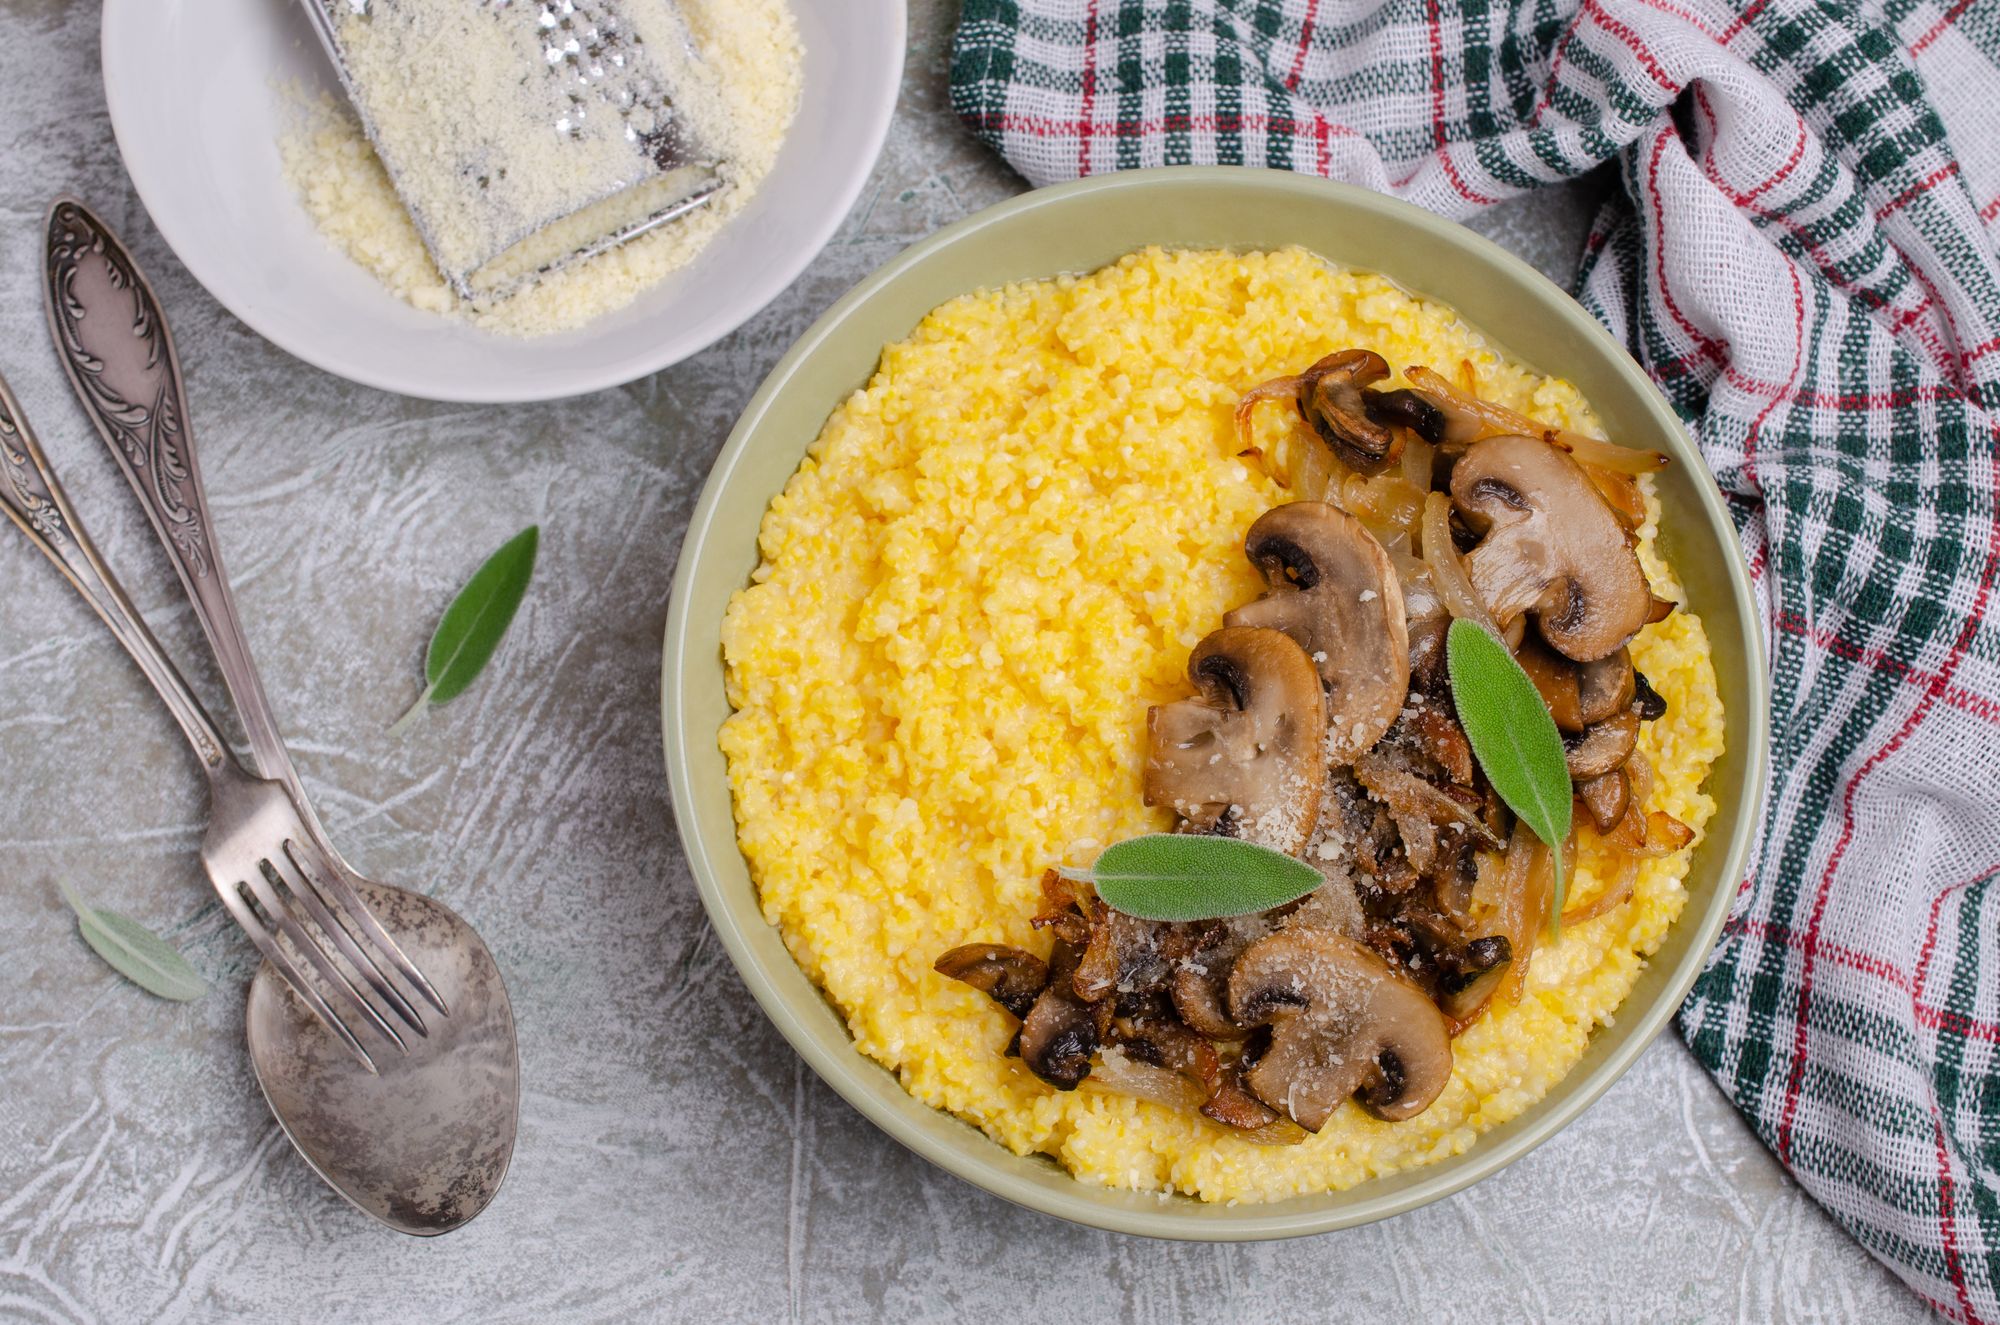 Baked Polenta with Cheese and Mushrooms